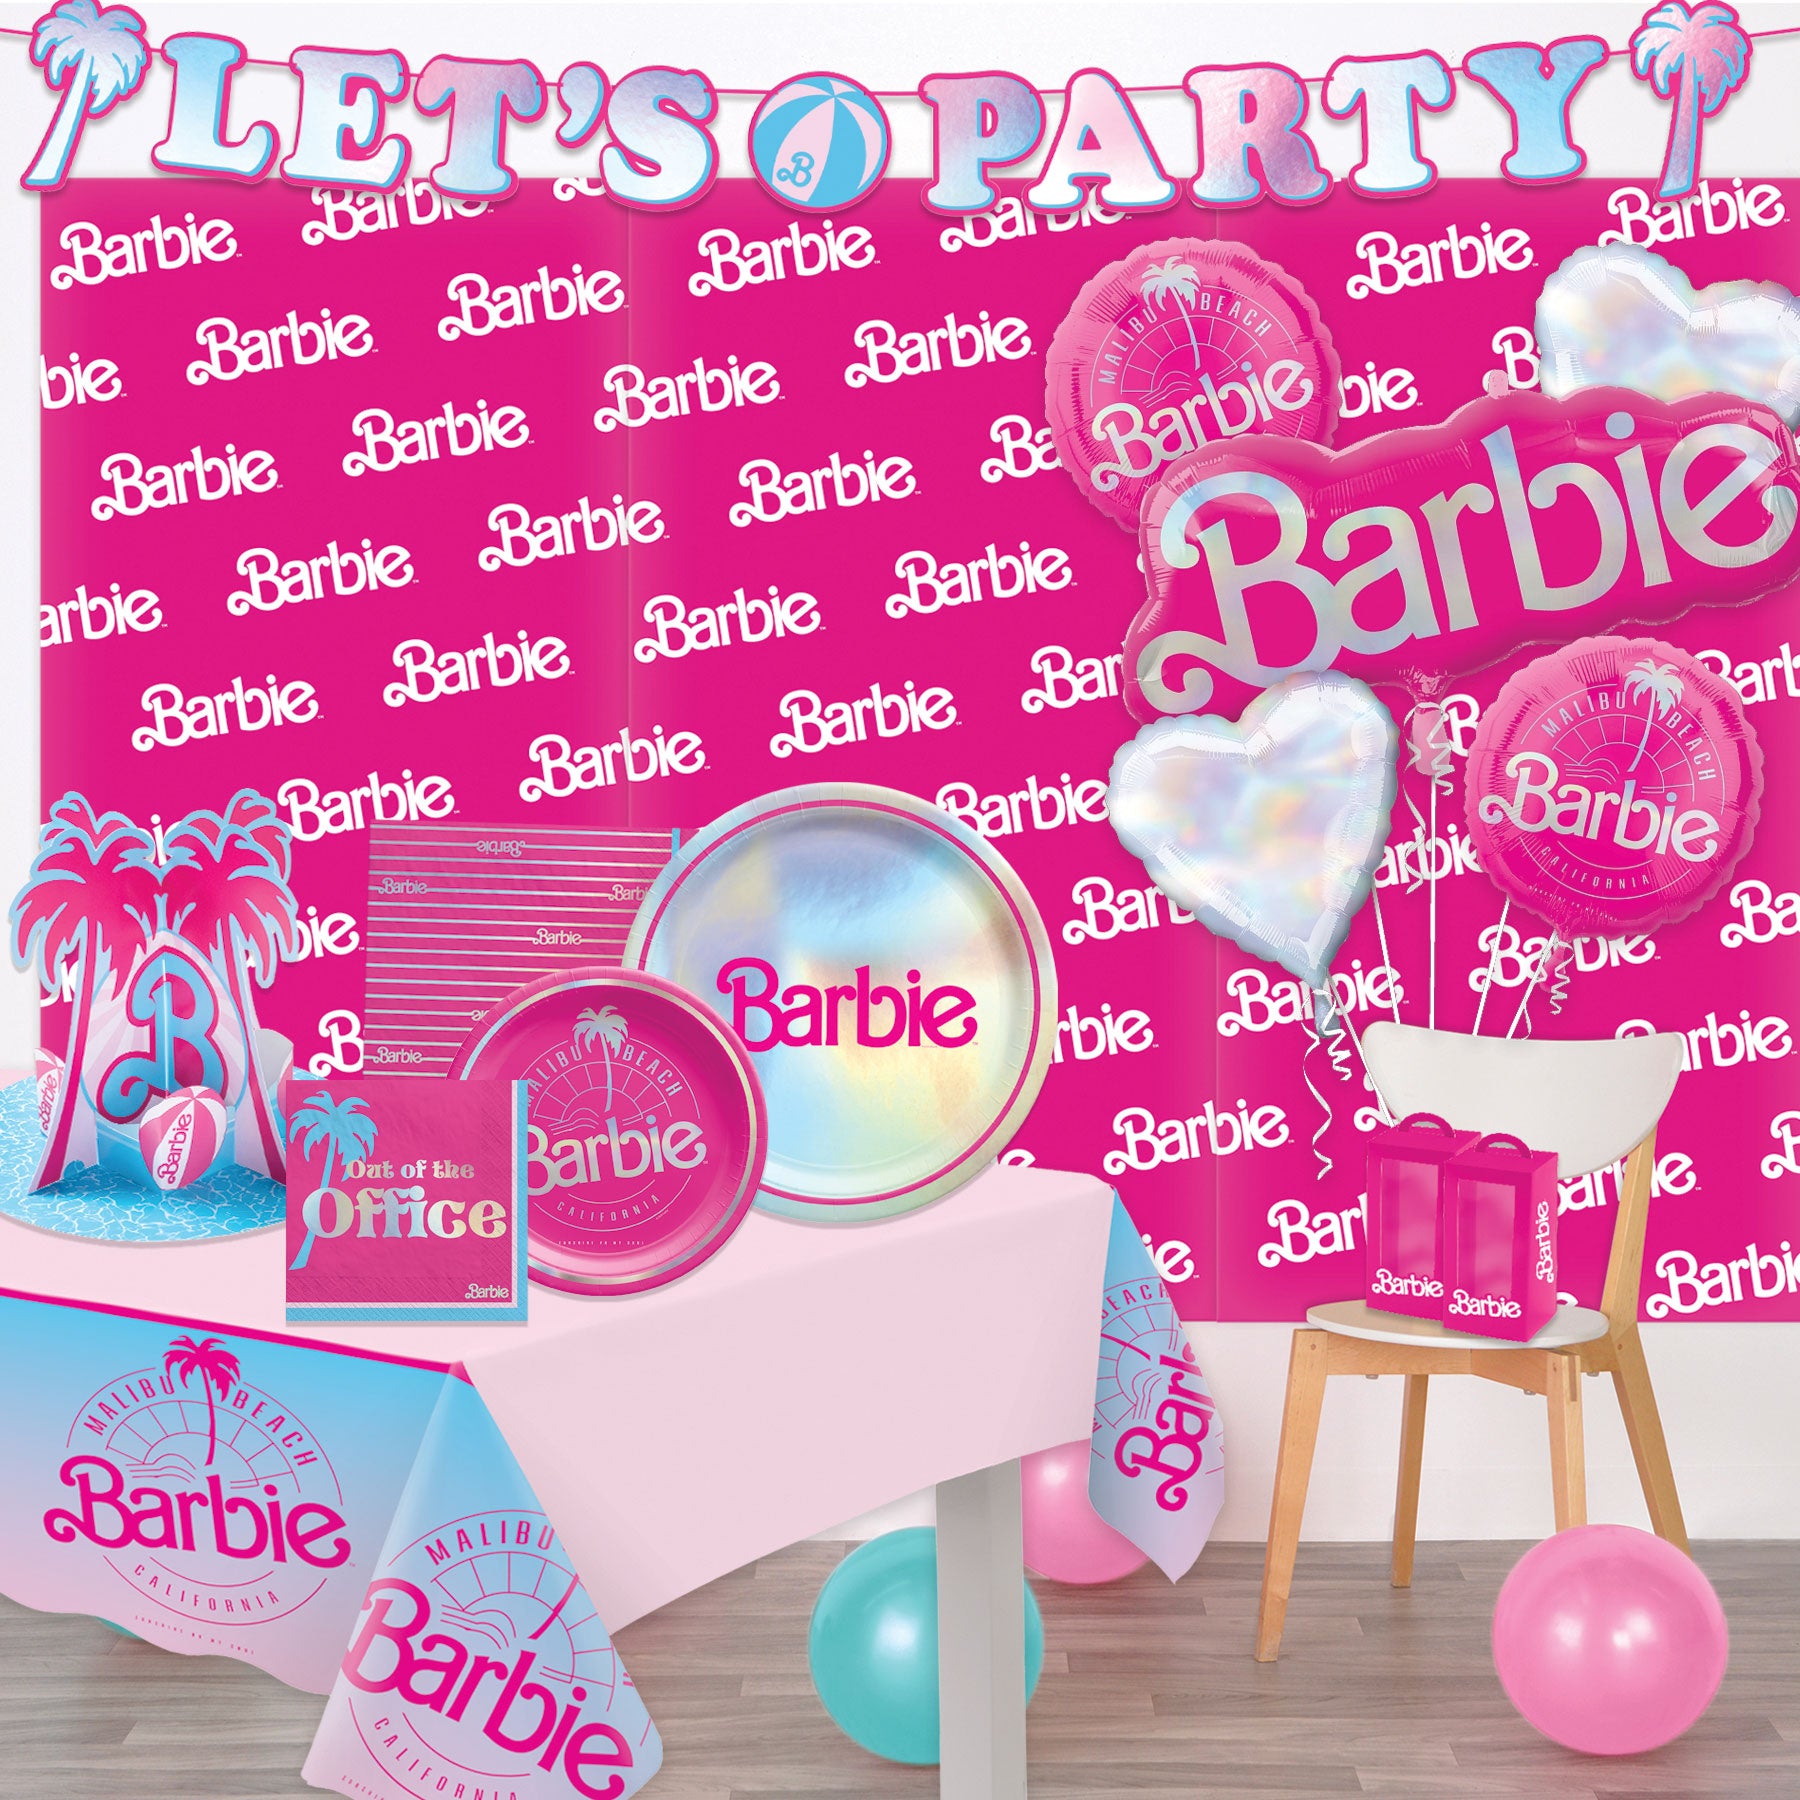 New barbie tableware and decorations for party